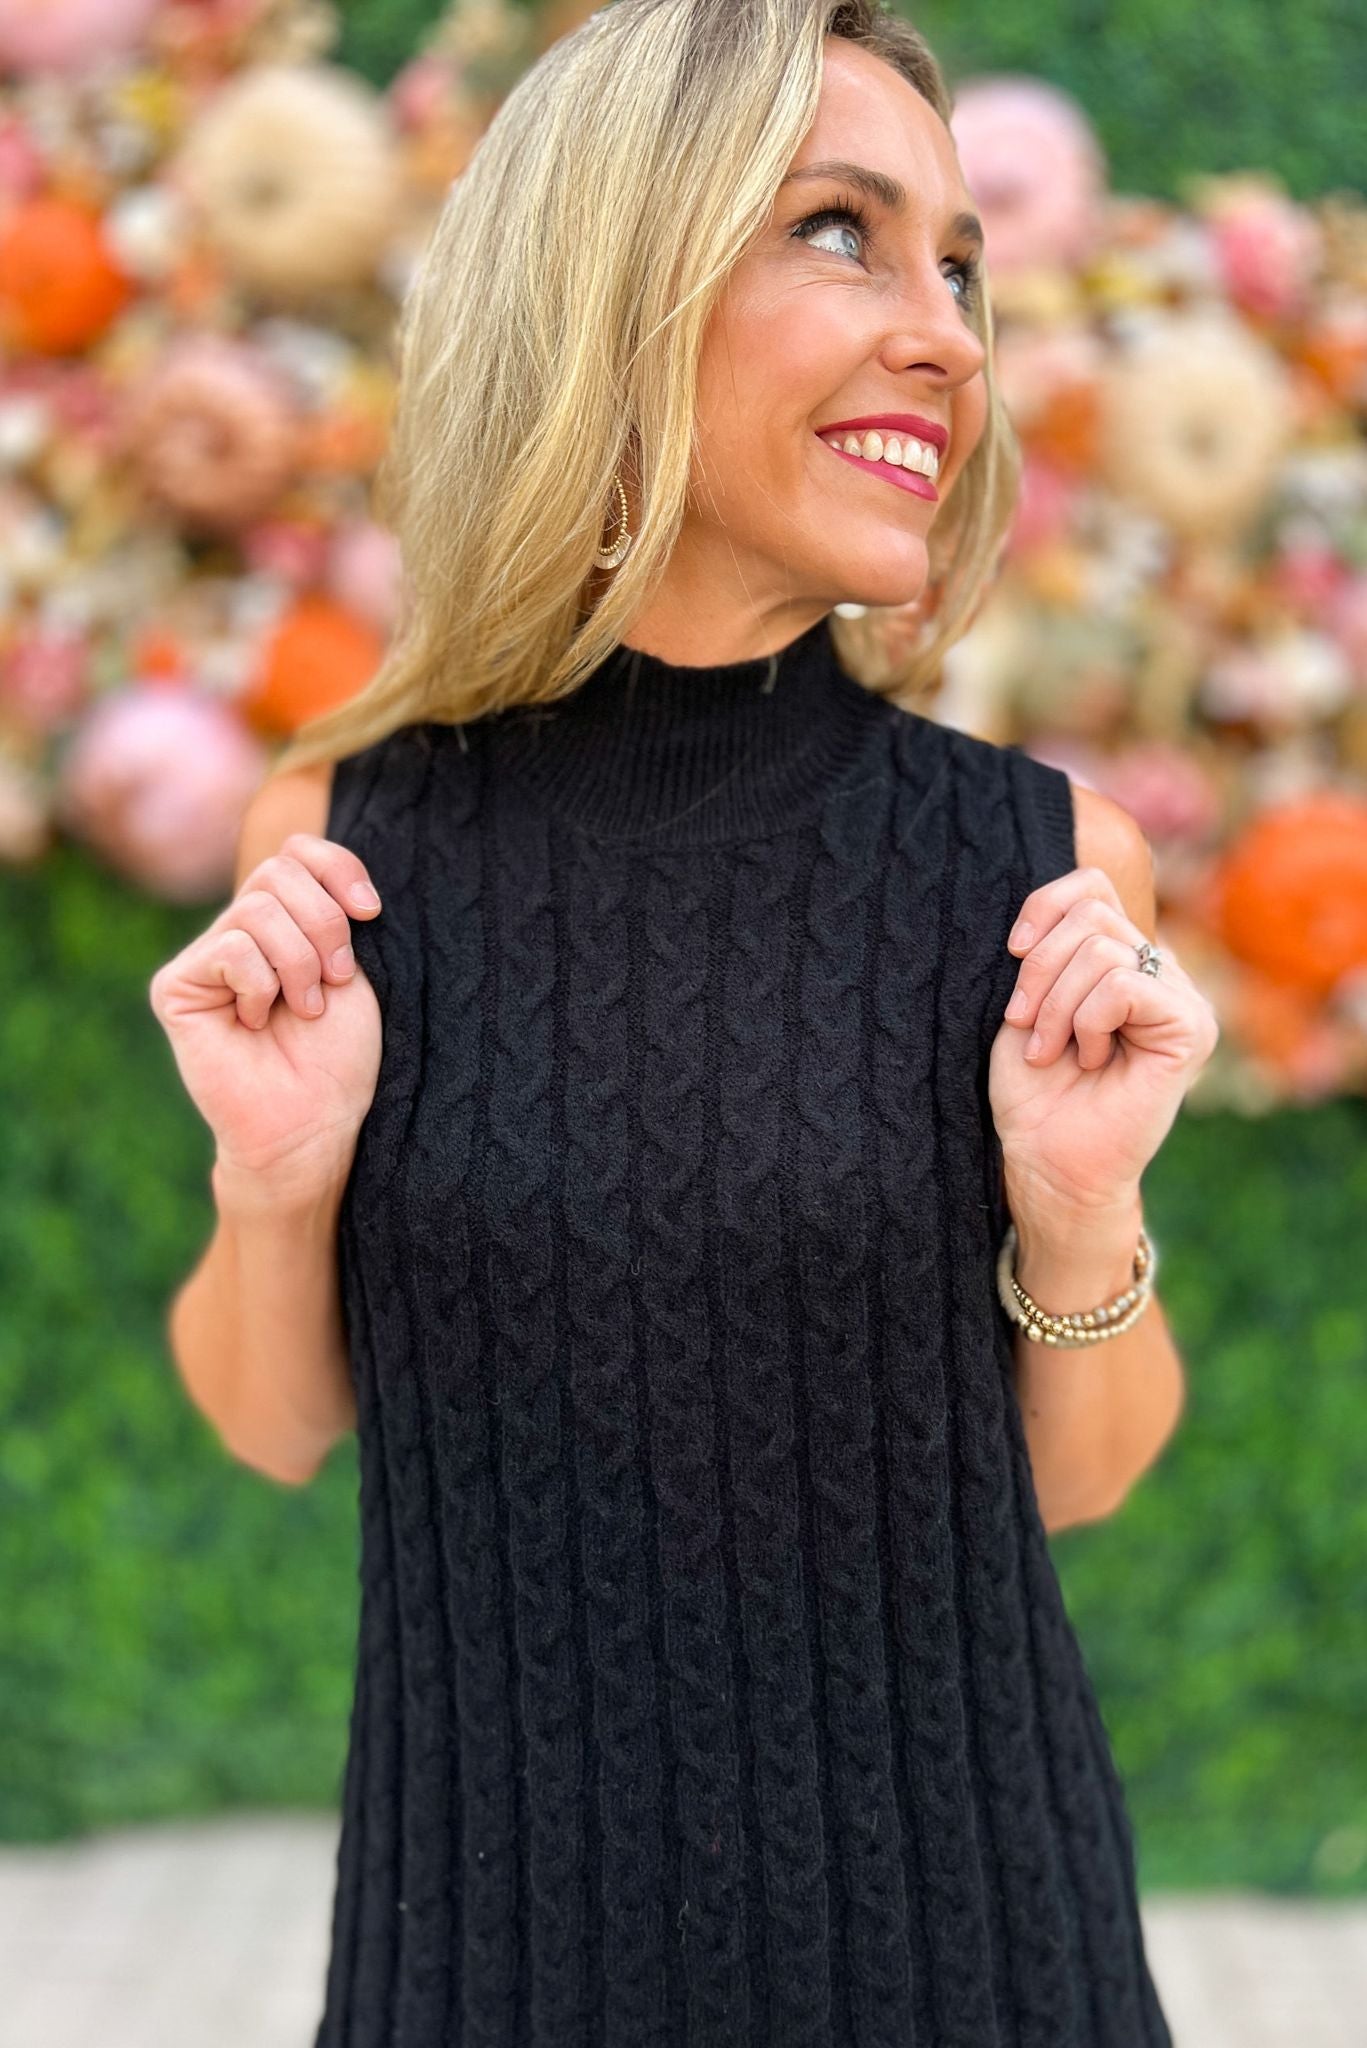 Black Cable Knit Mock Neck Sleeveless Sweater Dress, fall fashion, fall must have, sweater dress, thanksgiving look, mom style, layered look, shop style your senses by mallory fitzsimmons